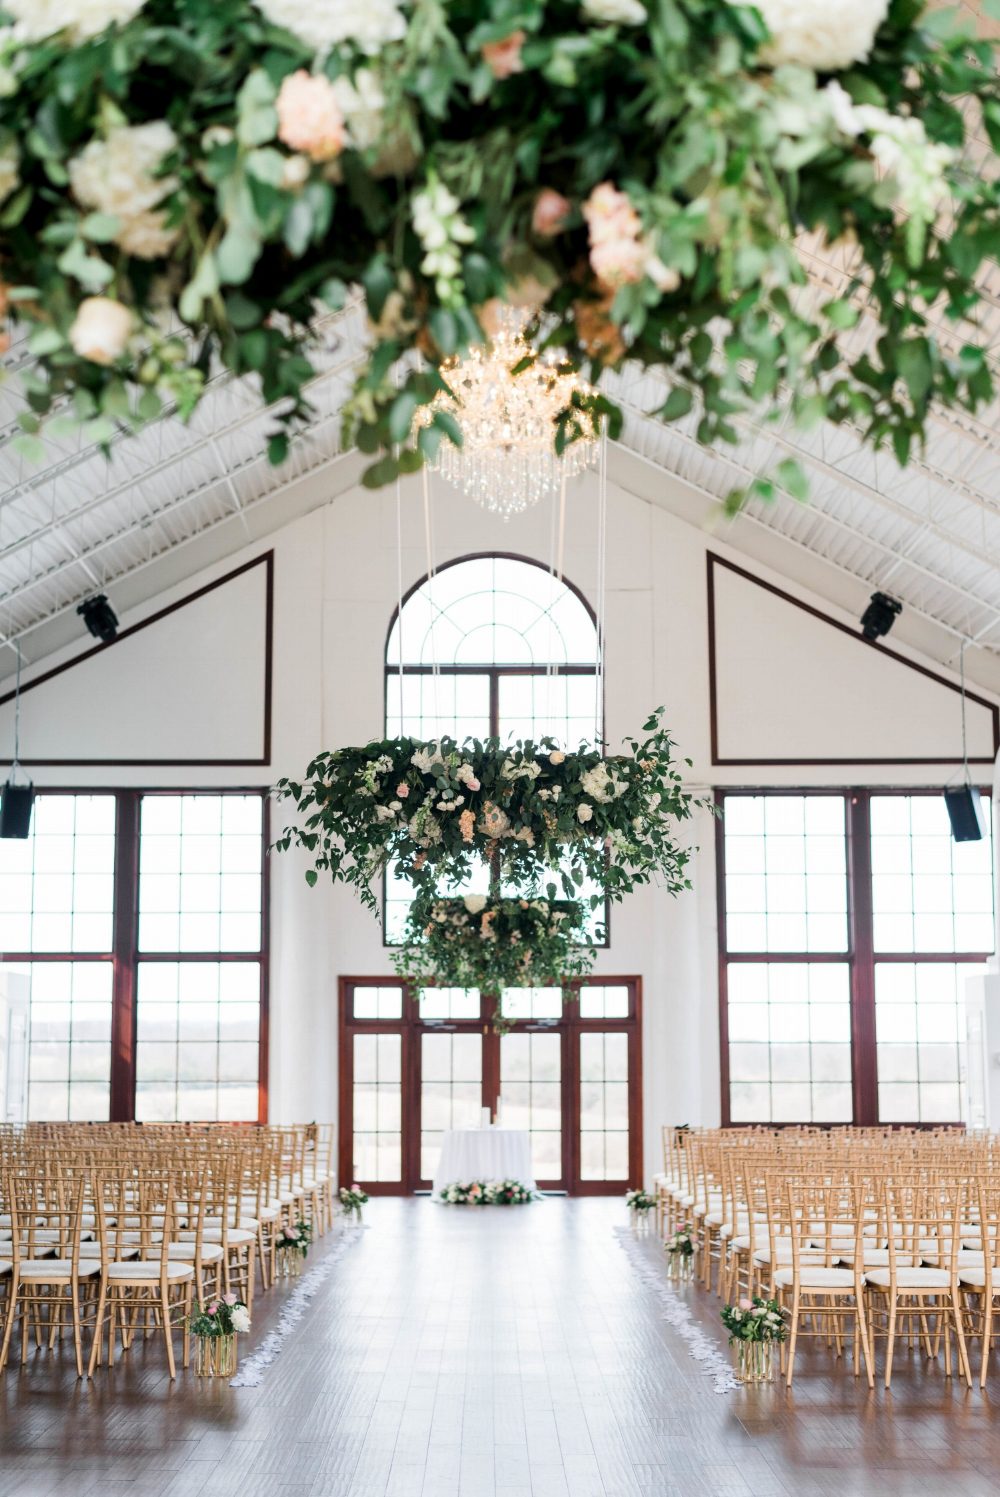 Stunning floral and greenery installations at Raspberry Plain Manor, Leesburg, Virginia in April, the beautiful chandelier at the venue is framed by our designs. The wedding party processed under the elegant installation creating a gorgeous atmosphe…